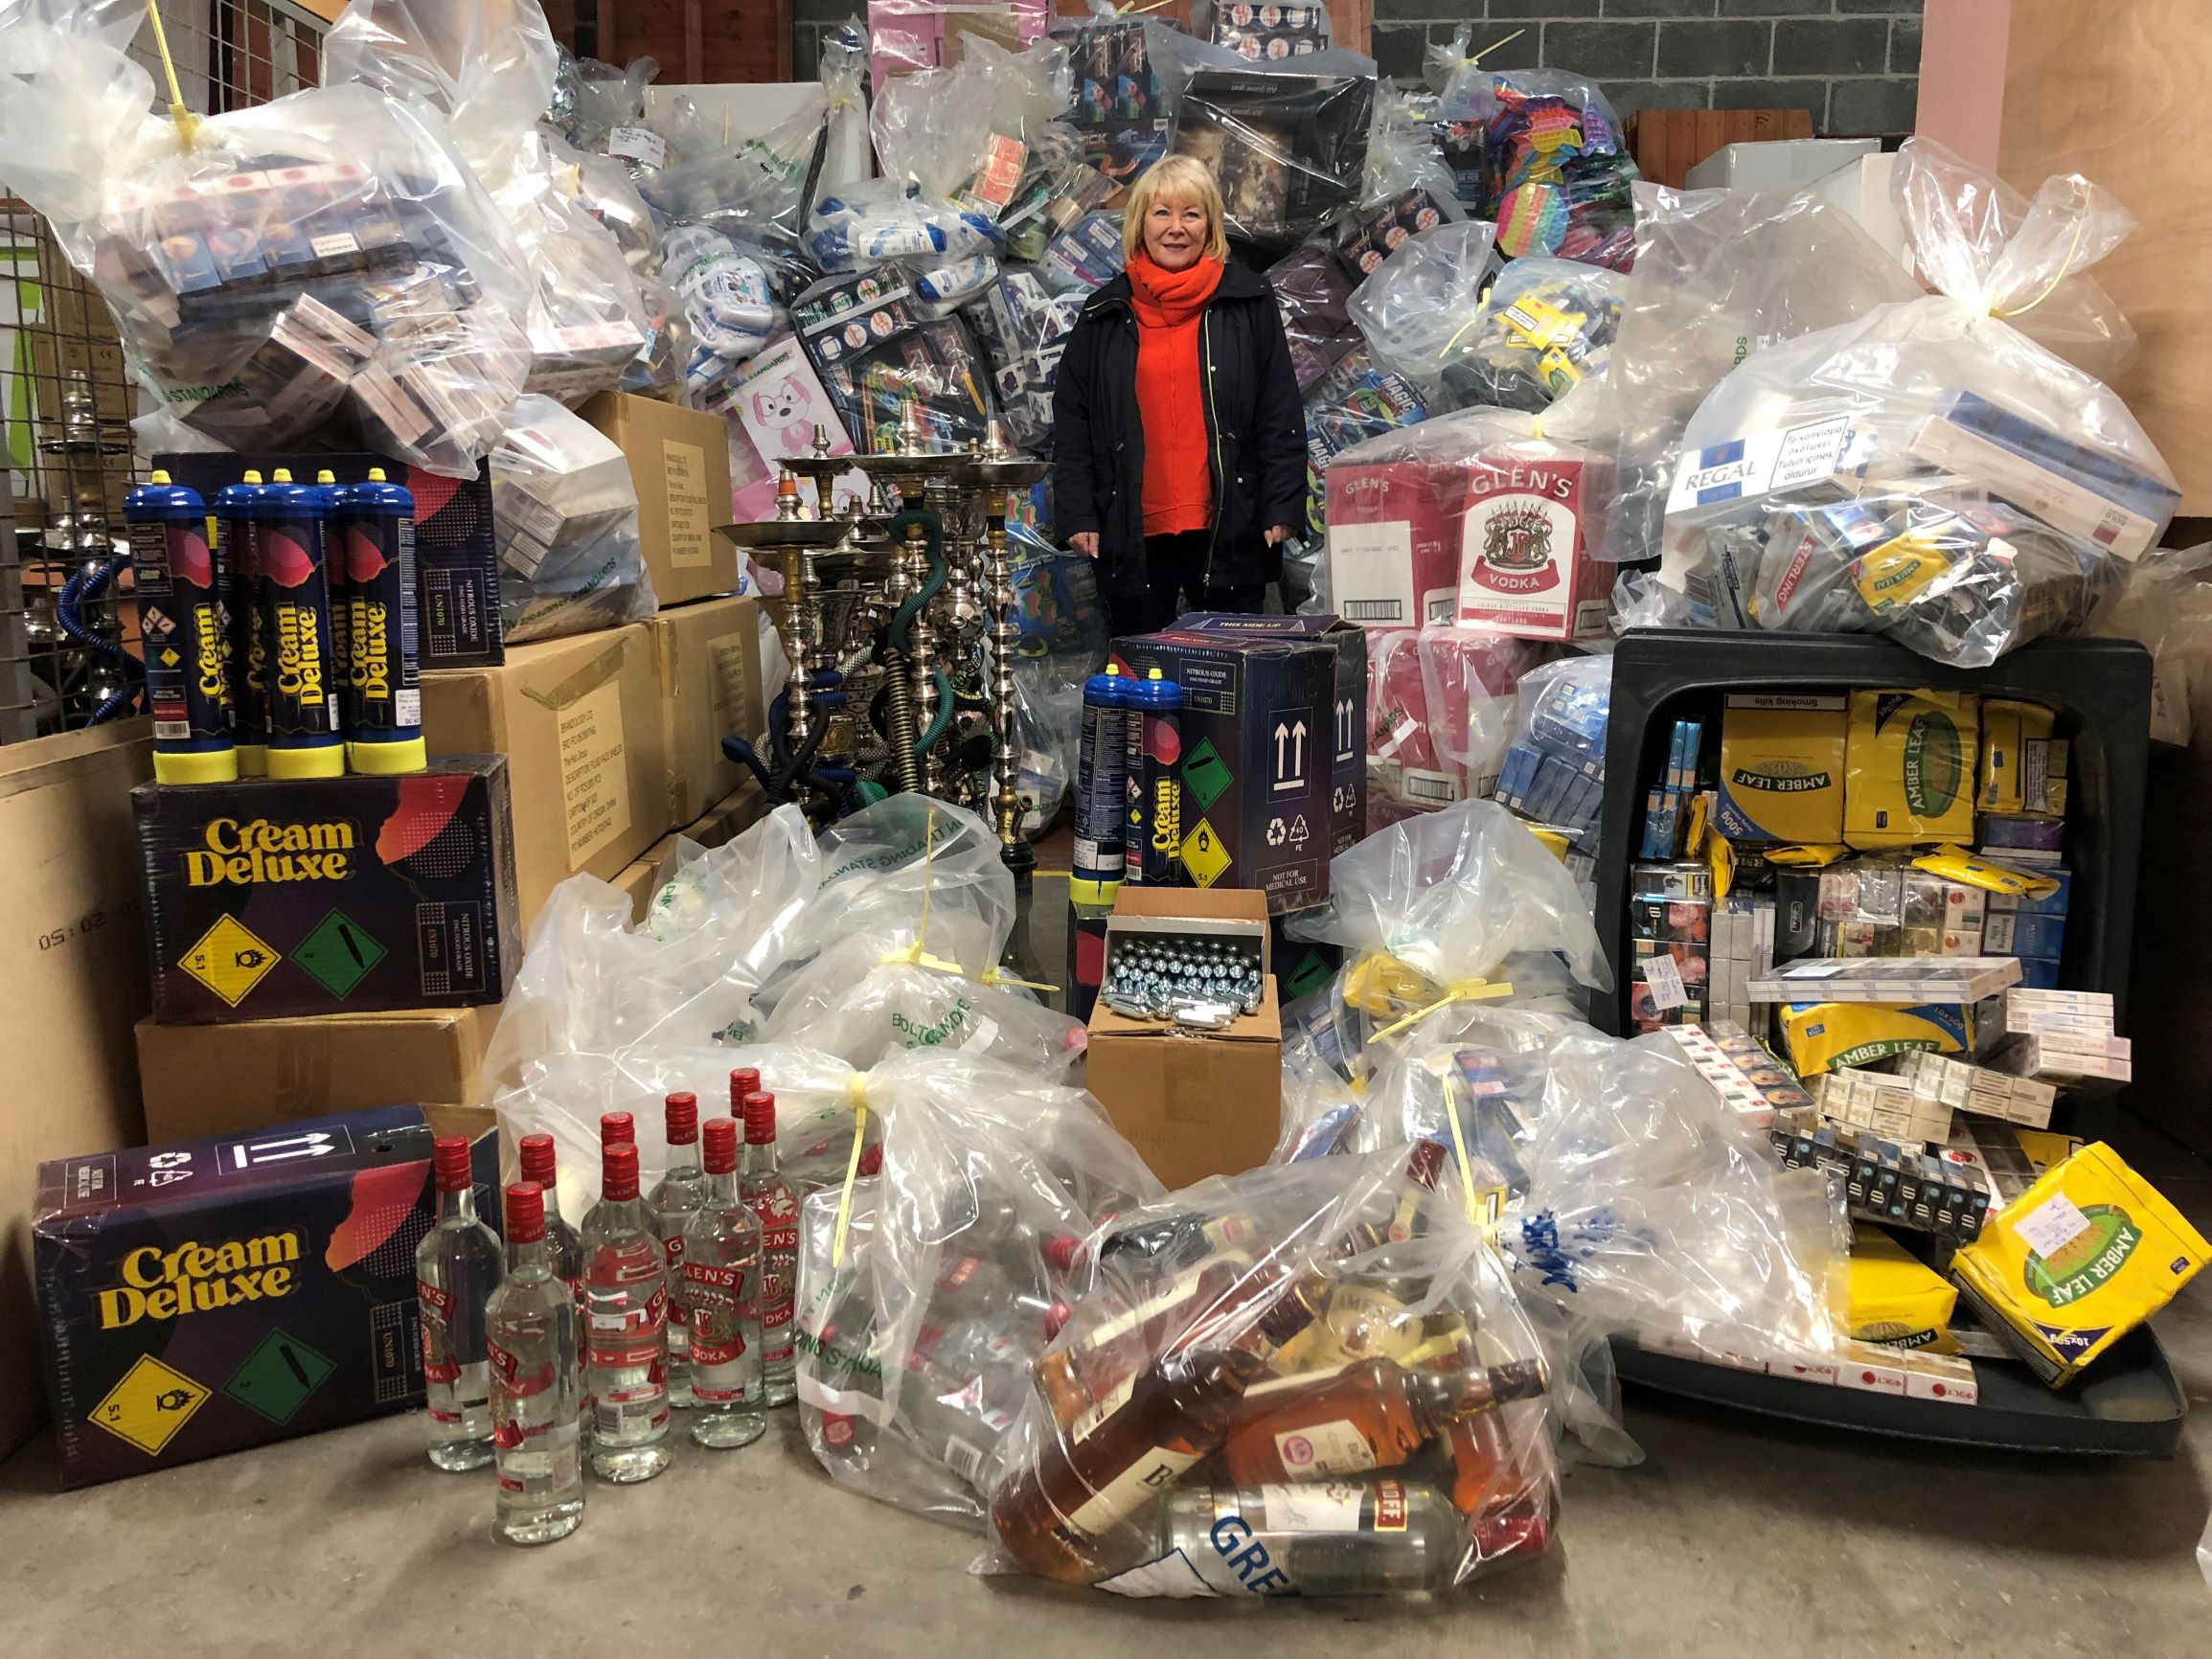 Illegal tobacco, fake alcohol among £200,000 worth of illegal goods seized in Bolton